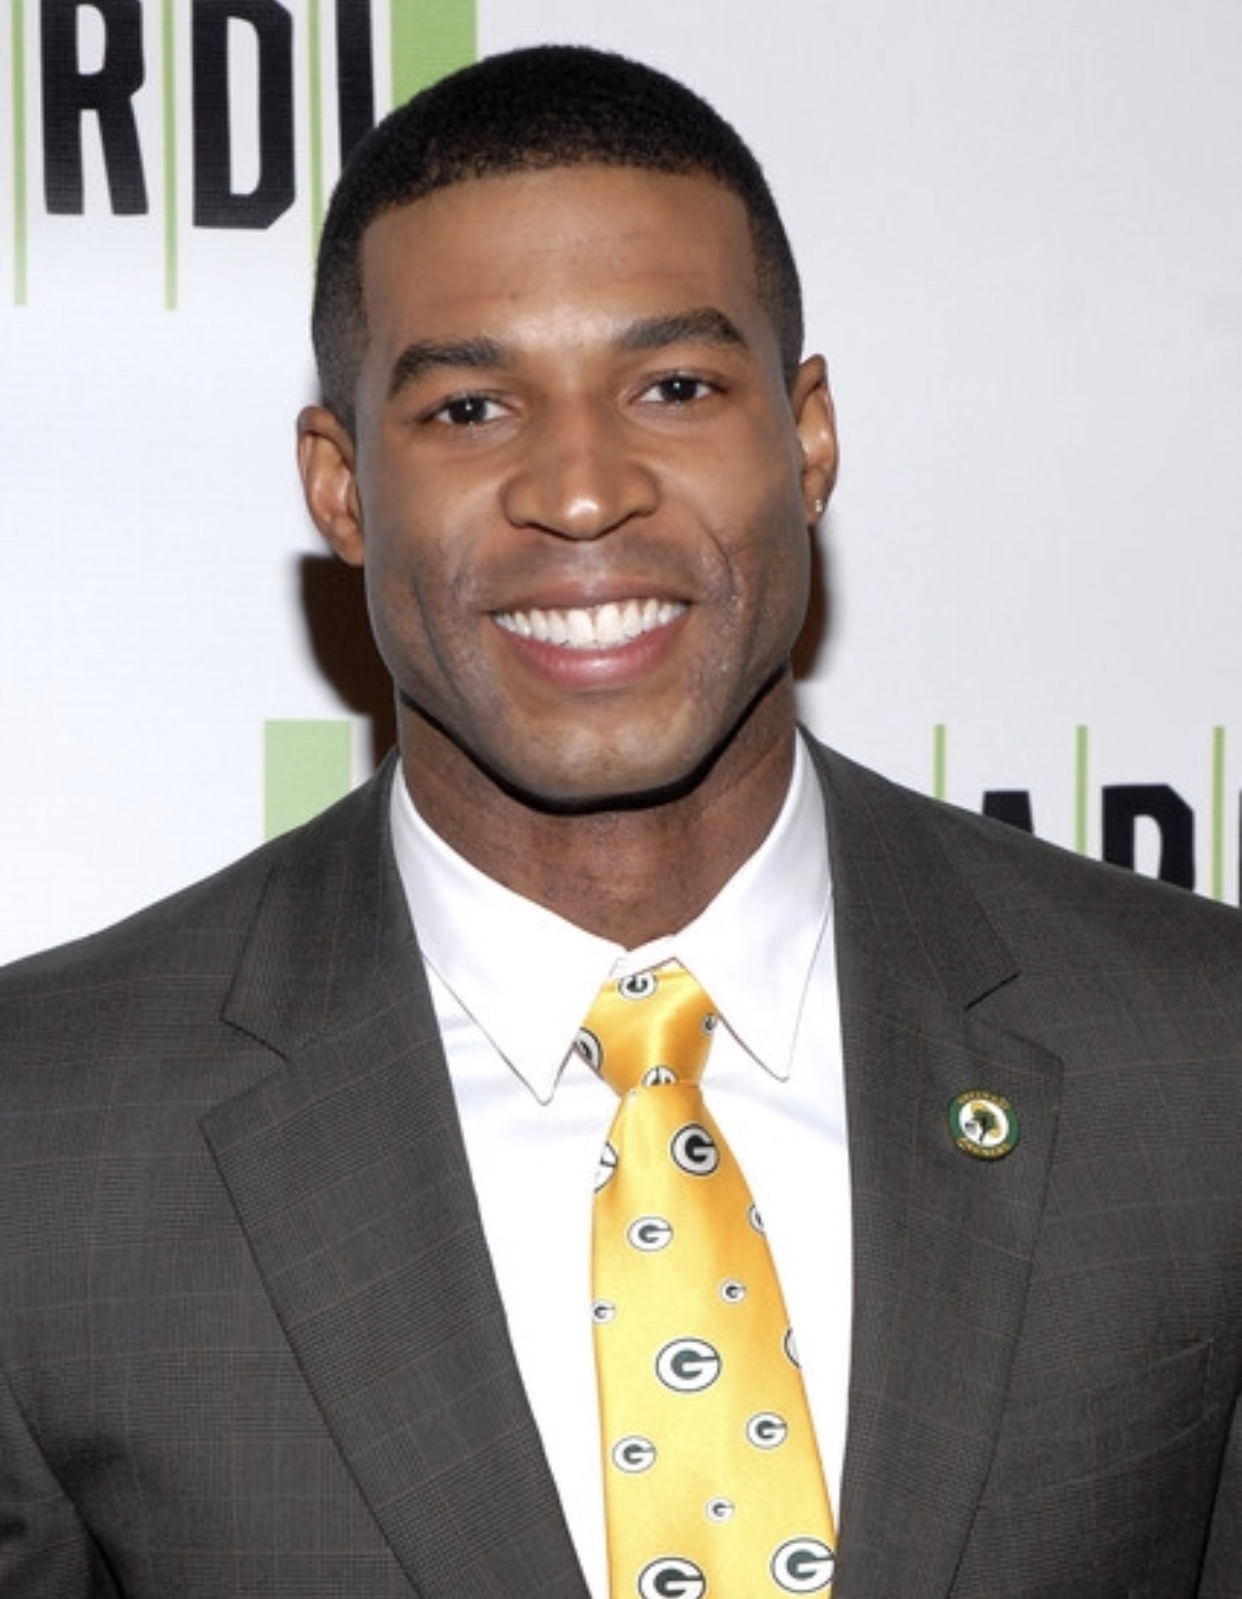 xemsays:  ROBERT CHRISTOPHER RILEY is a 37 year old actor who most will recognize